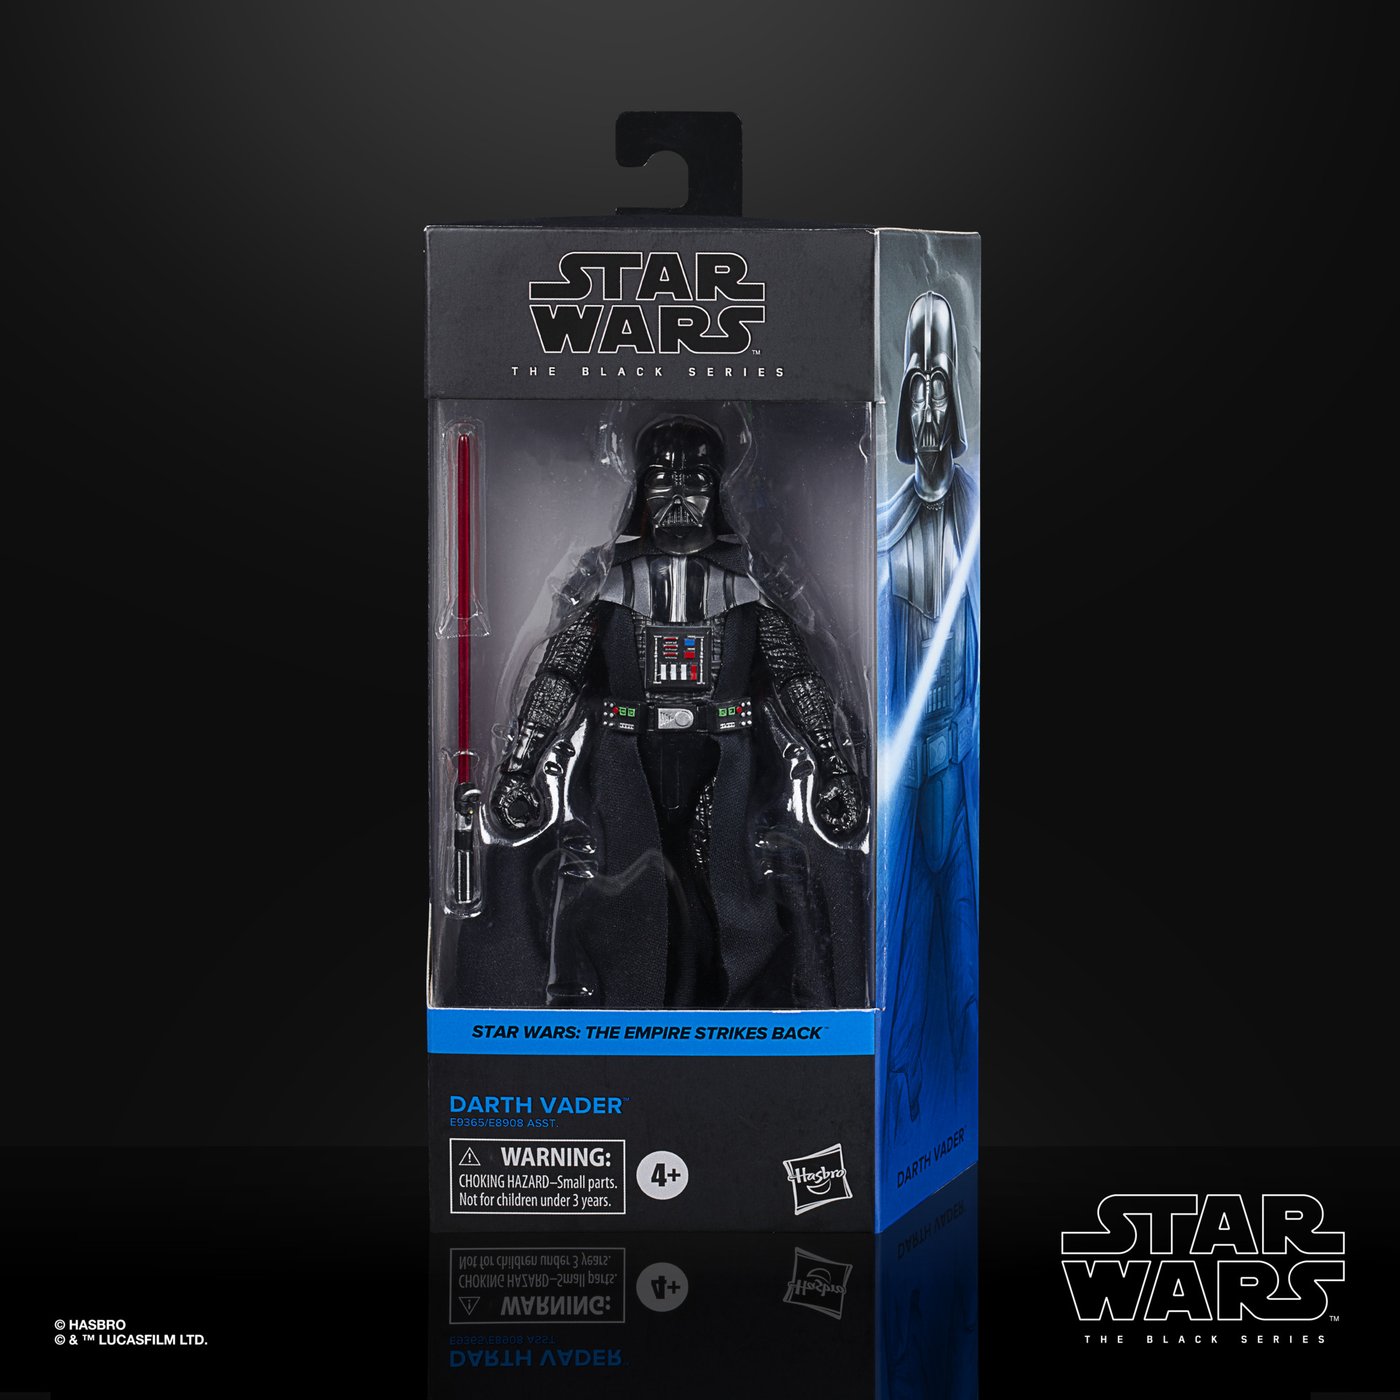 Star Wars The Black Series 6-Inch Action Figures Wave 1 E5 Darth Vader